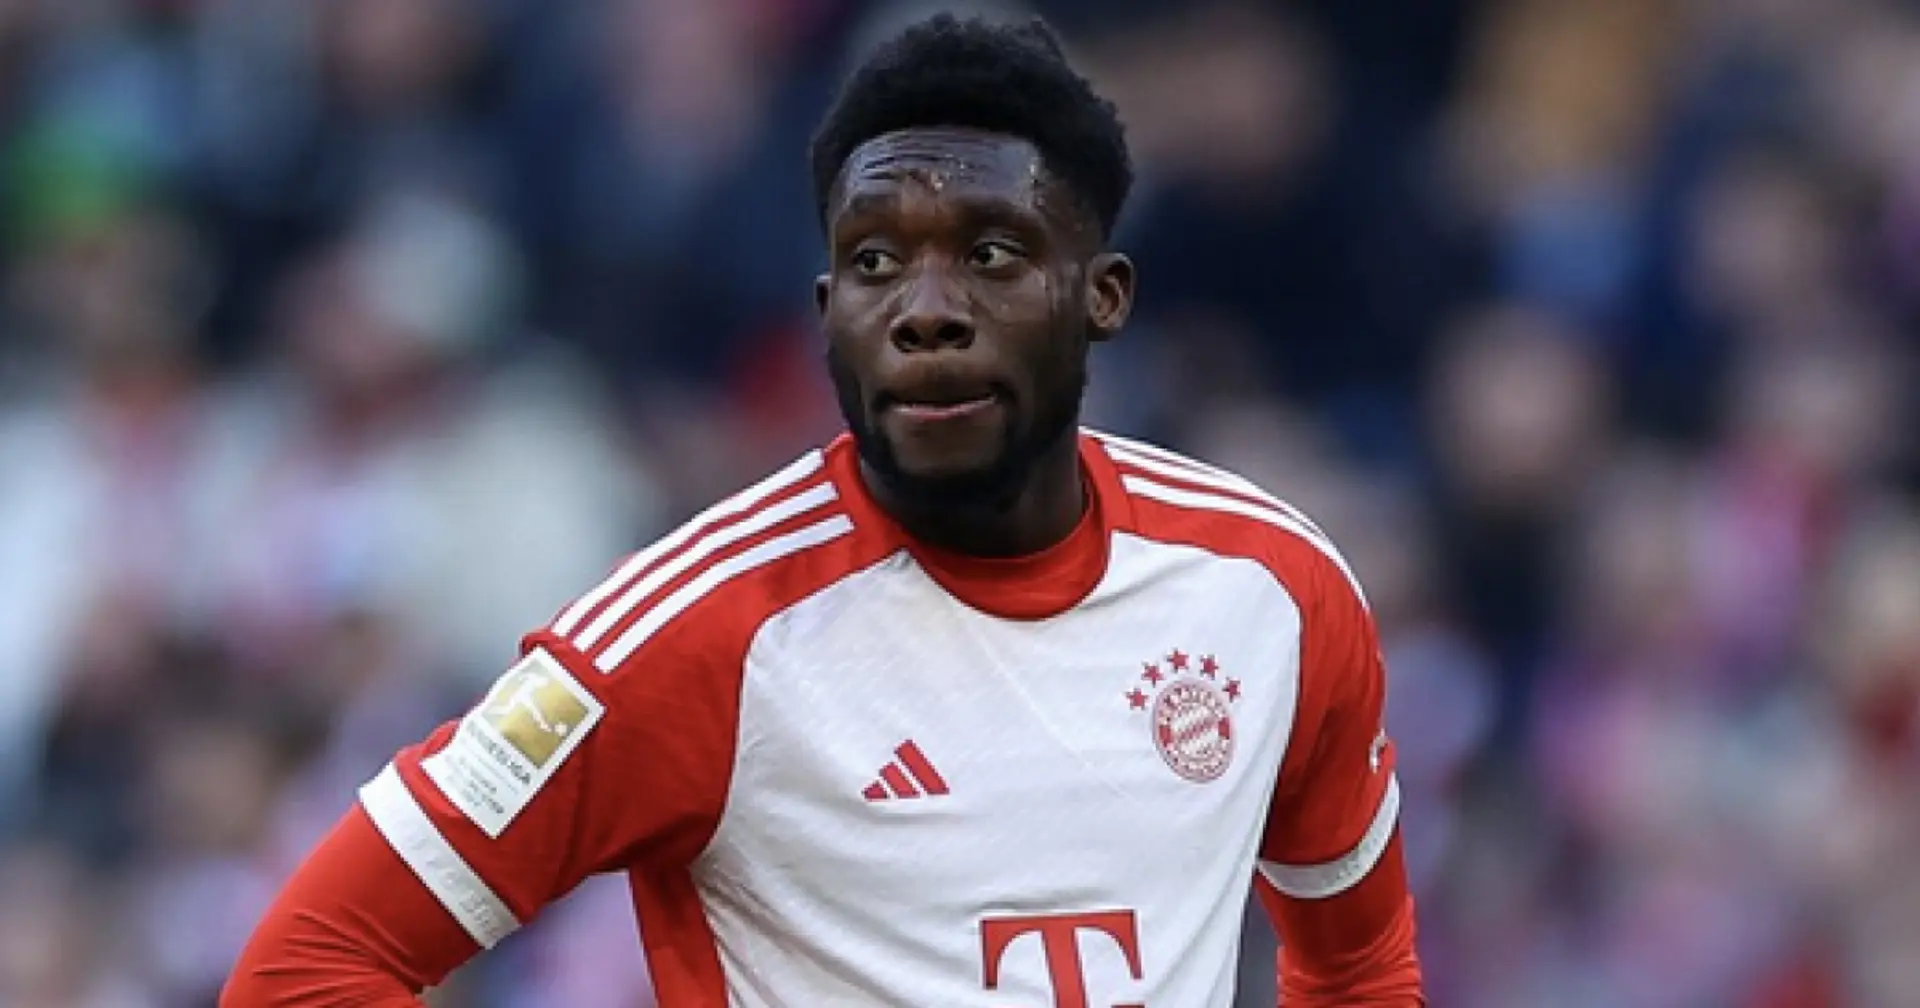 Real Madrid's plan B for Alphonso Davies revealed (reliability: 5 stars)